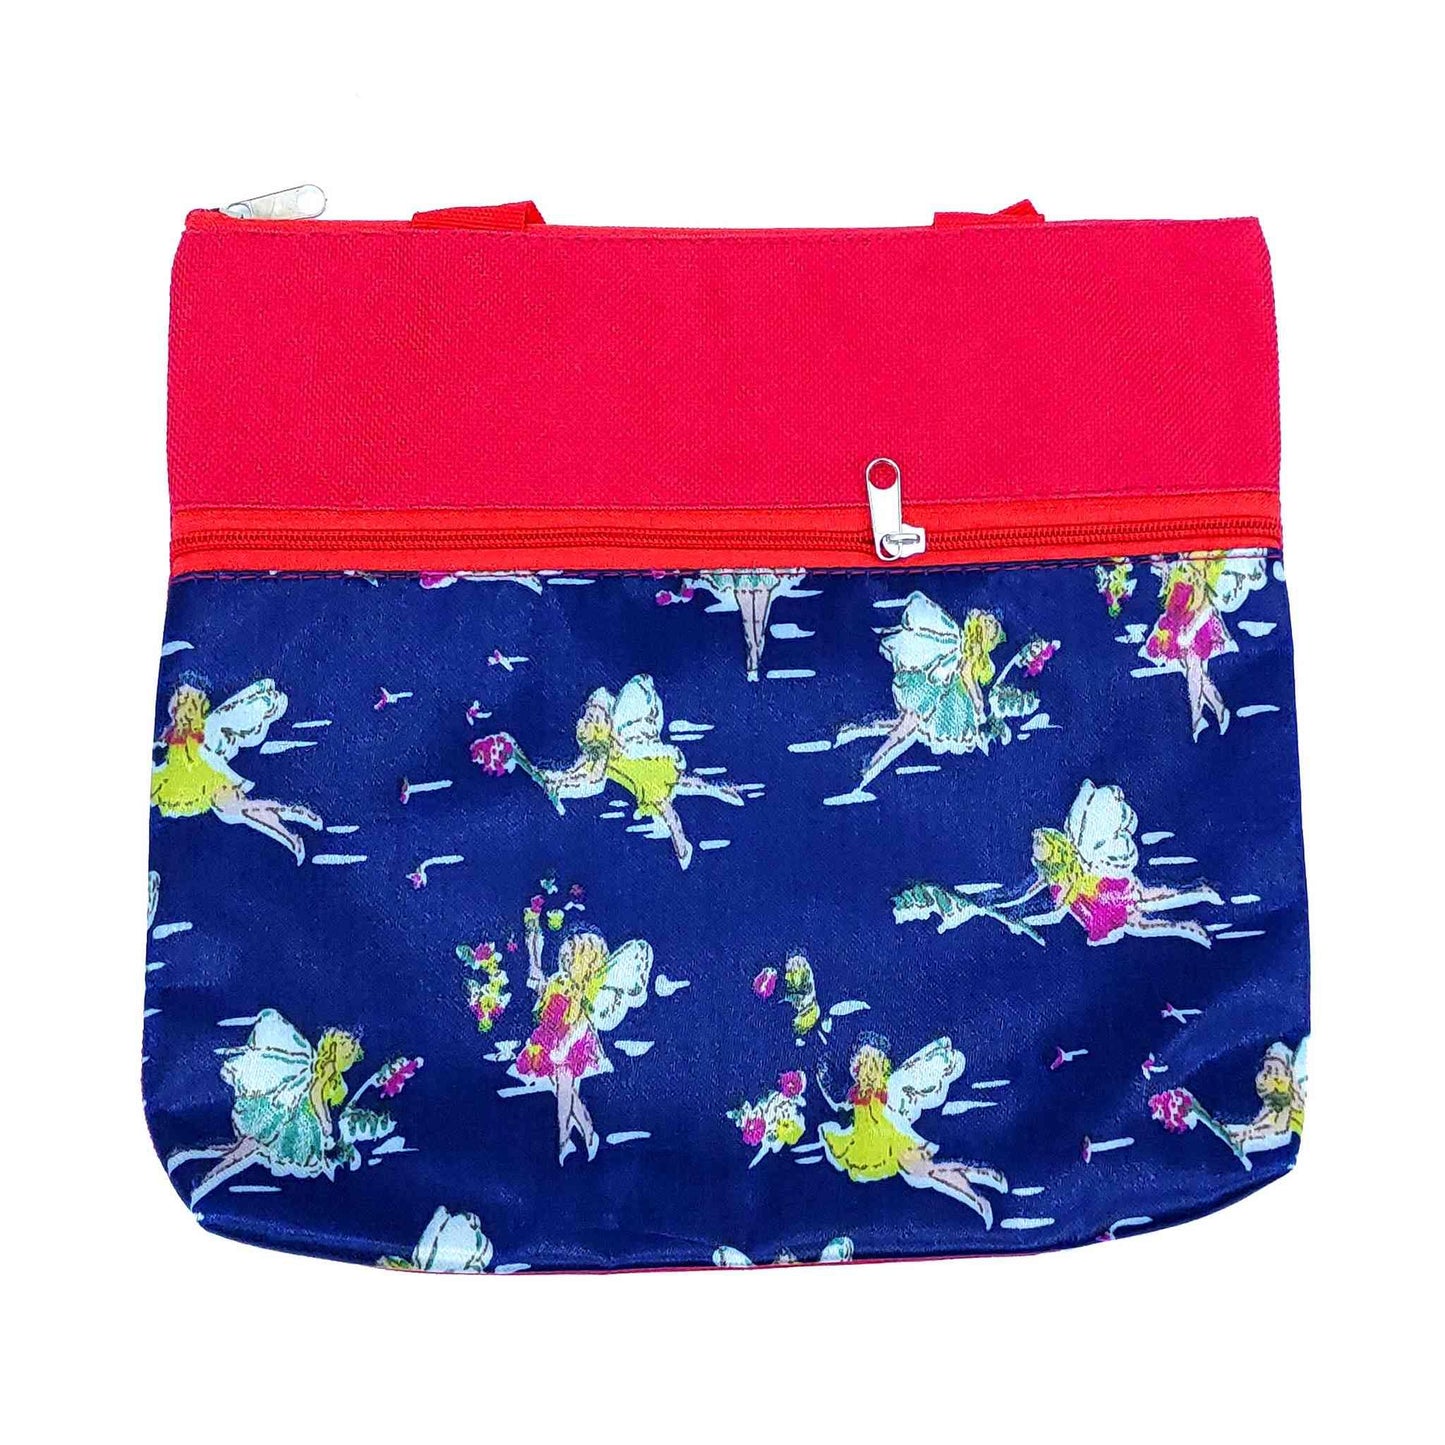 Imported Durable Canvas Printed multi purpose utility Medium size Bag with handles for all occasions for the girls and ladies, Design 1, Red - Indian Petals